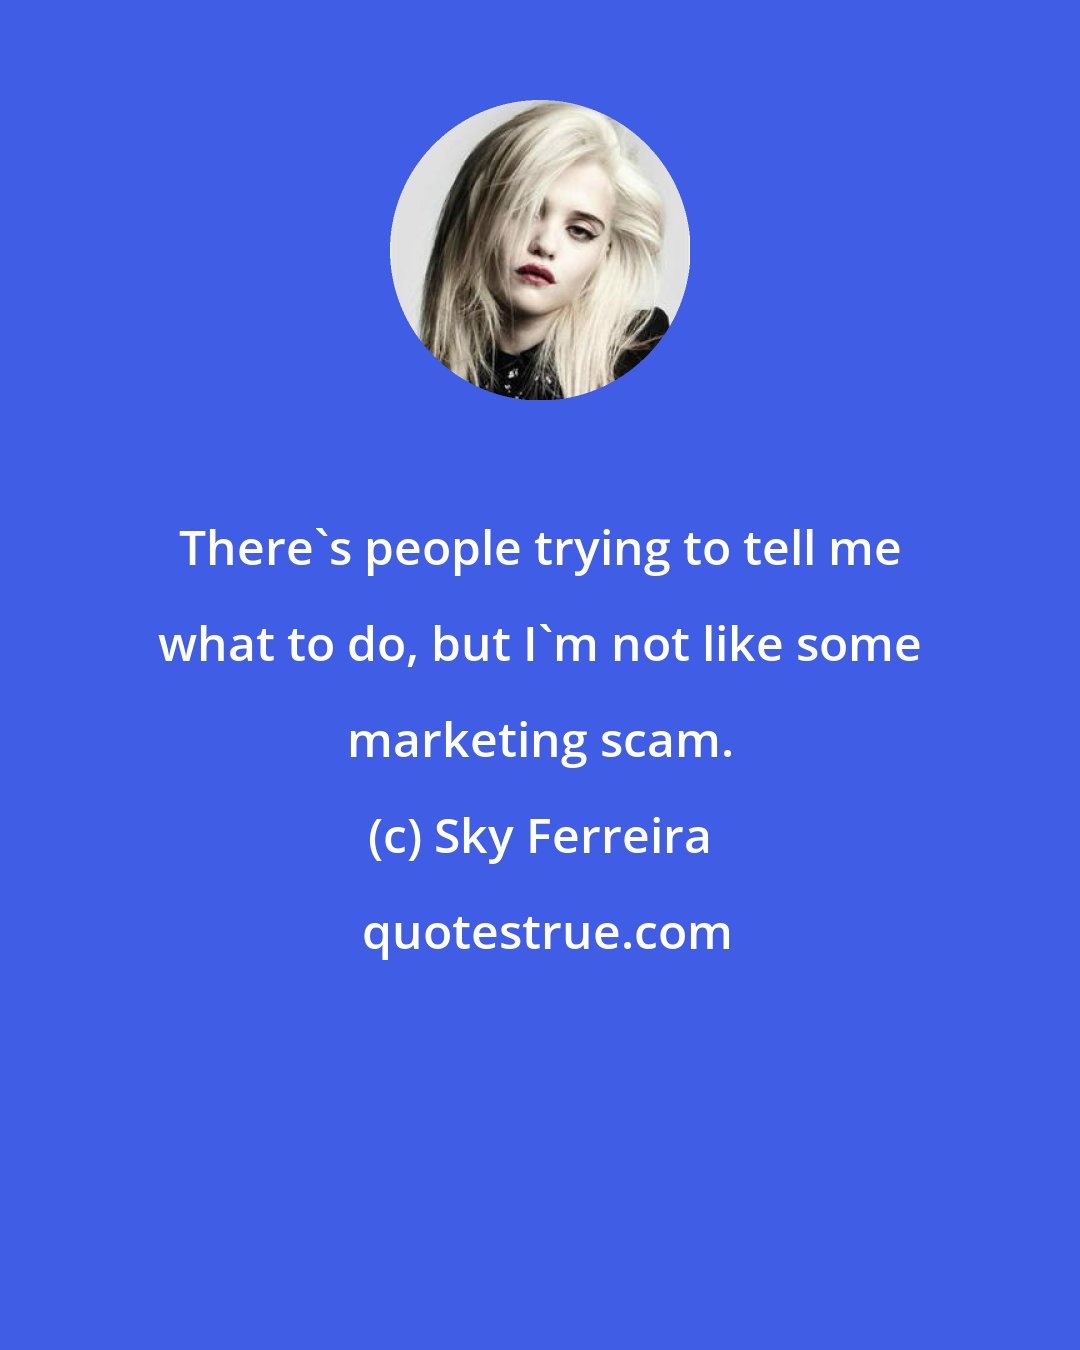 Sky Ferreira: There's people trying to tell me what to do, but I'm not like some marketing scam.